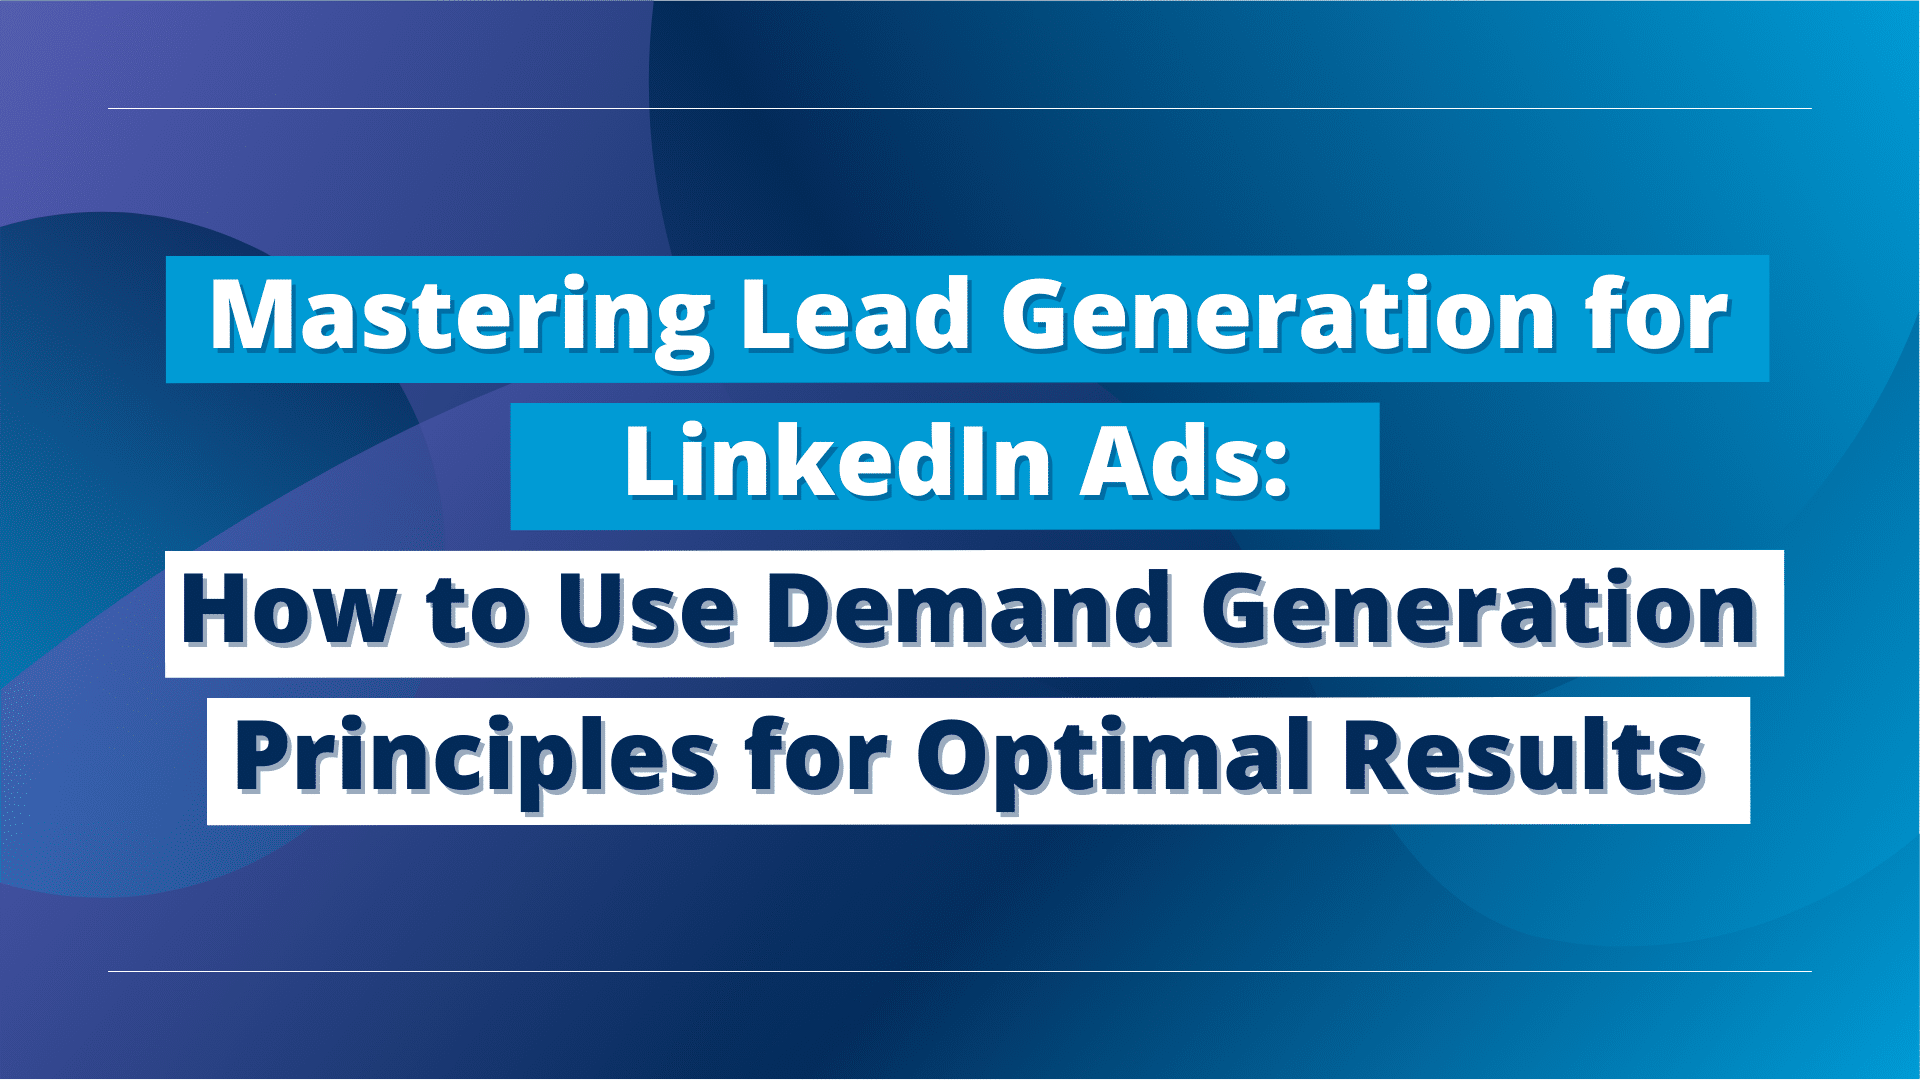 Combining Demand Generation and Linkedin ads